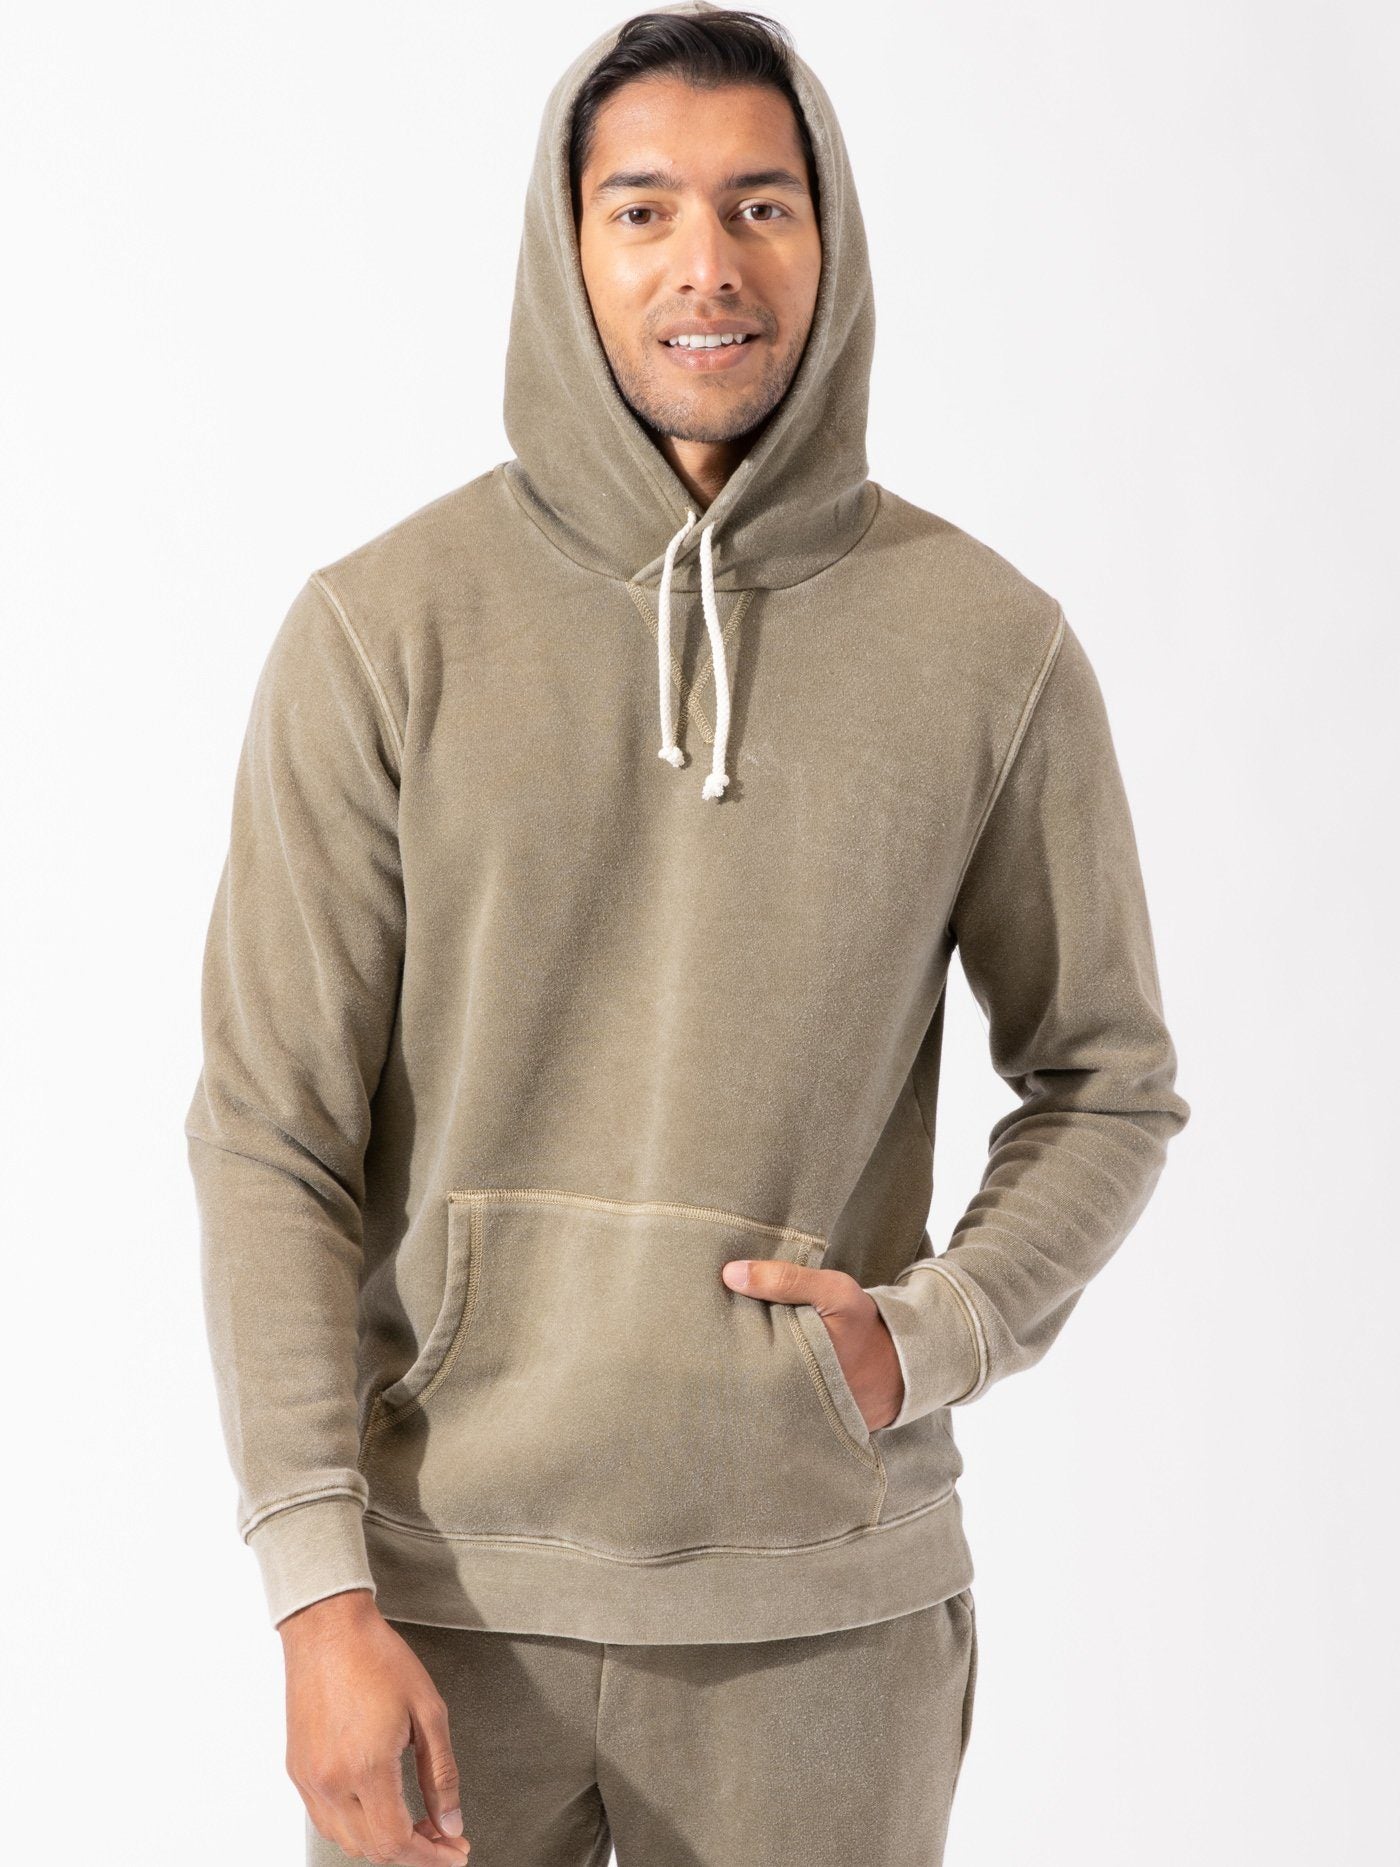 Mineral Wash Pullover Hoodie Mens Outerwear Sweatshirt Threads 4 Thought 